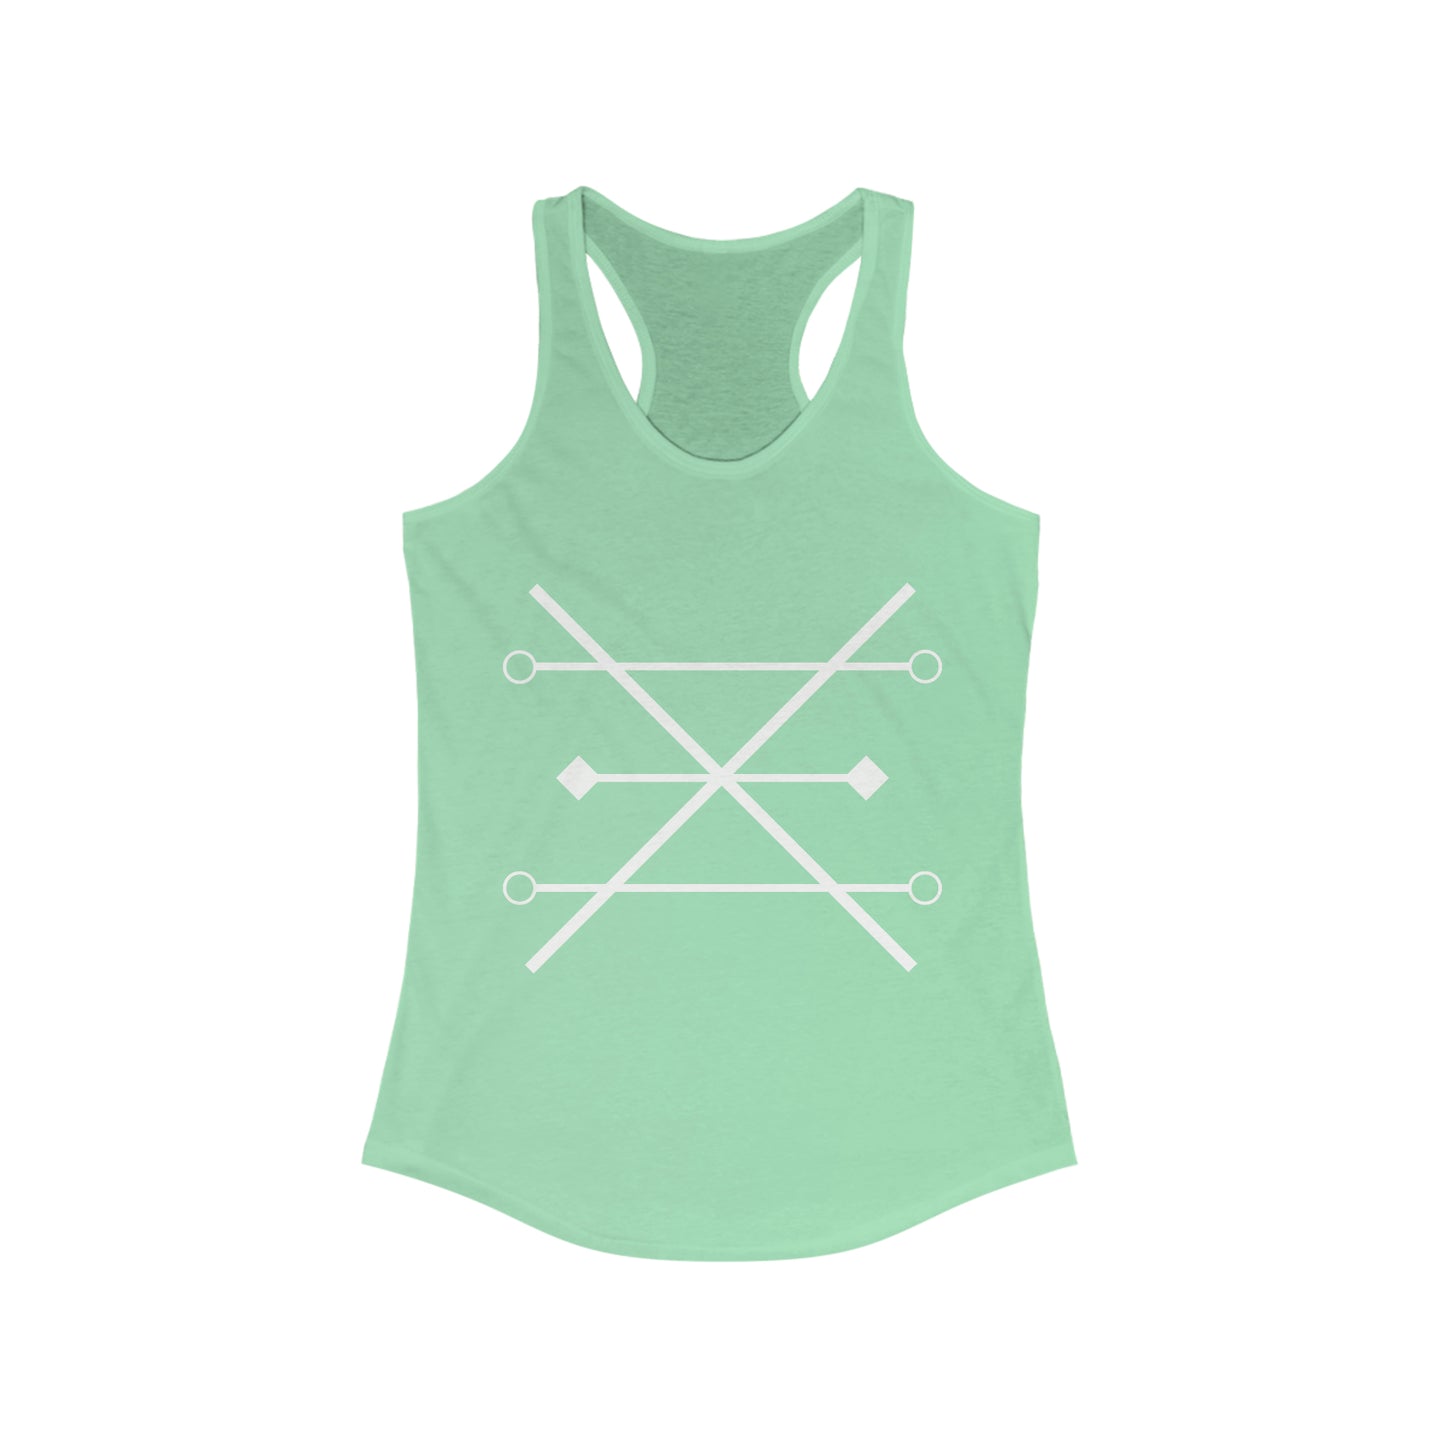 Younger Bodies Women's Tank